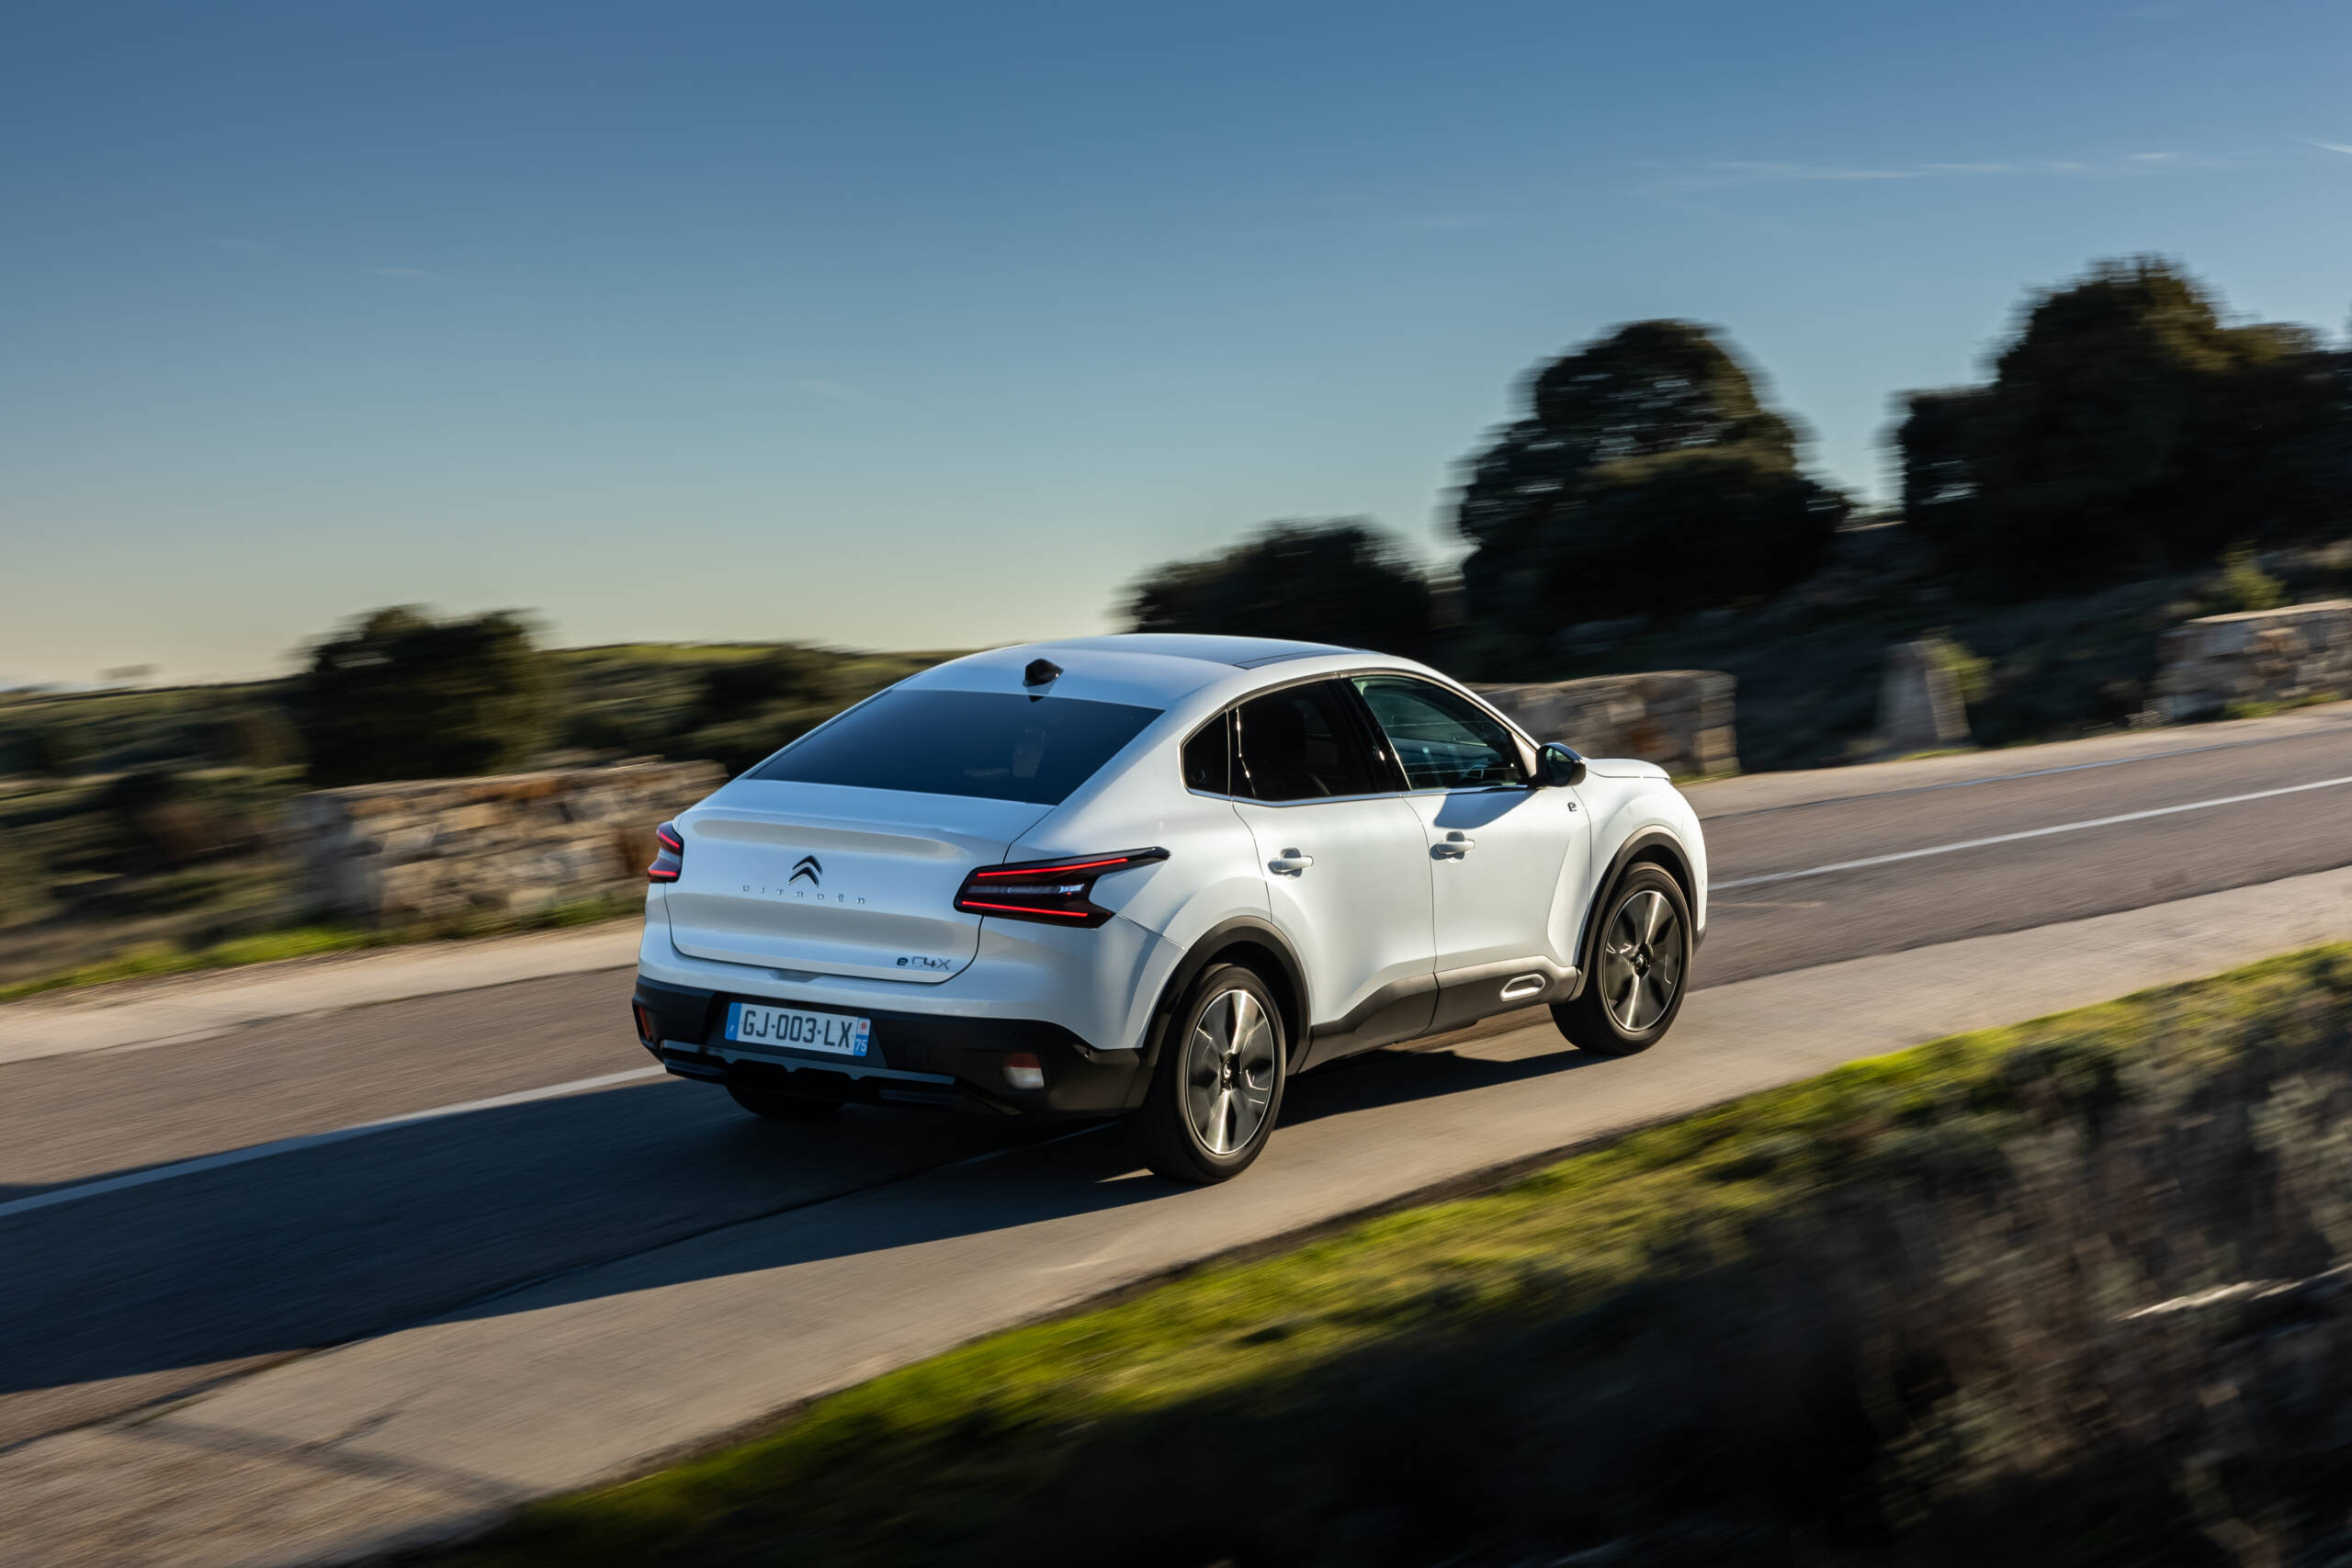 CITROËN ë-C4 and ë-C4 X ARE BOLSTERING THE PRODUCT OFFER WITH A NEW, MORE EFFICIENT ELECTRIC MOTOR WITH AN OPERATING RANGE UP TO 420 KM